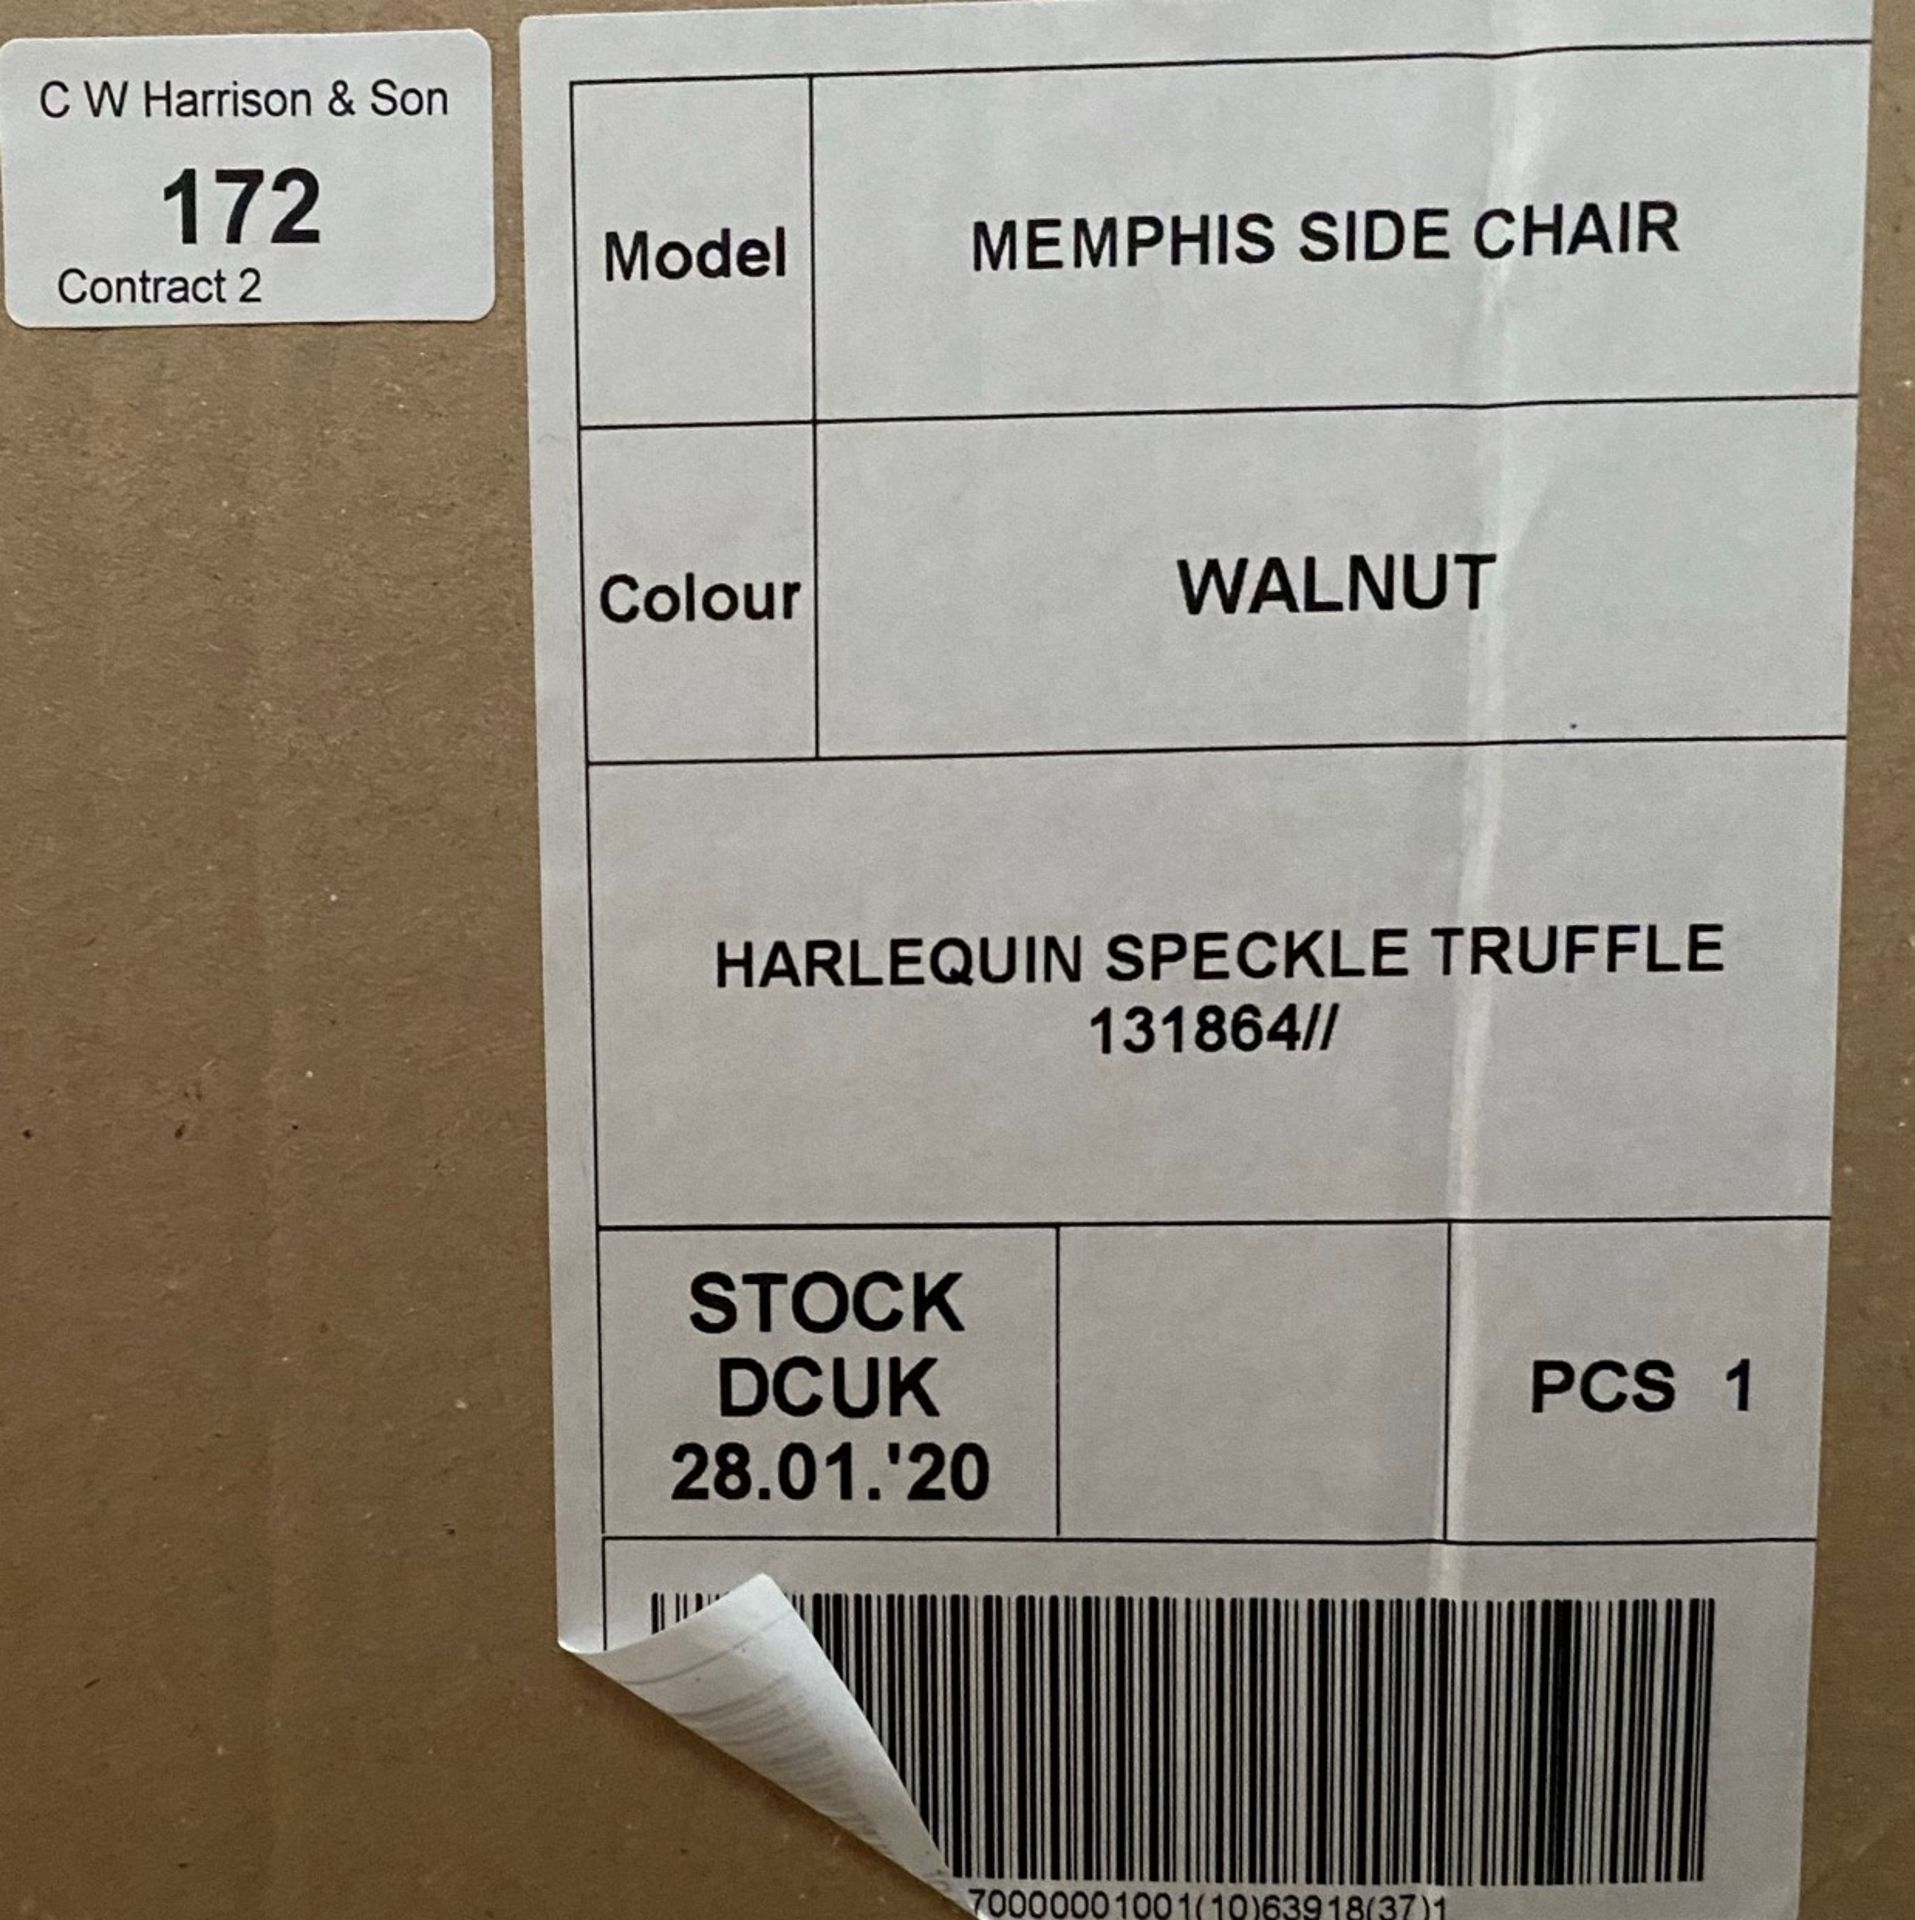 A Memphis Harlequin Speckle Truffle 131864 side/dining chair with walnut coloured frame - Image 4 of 4